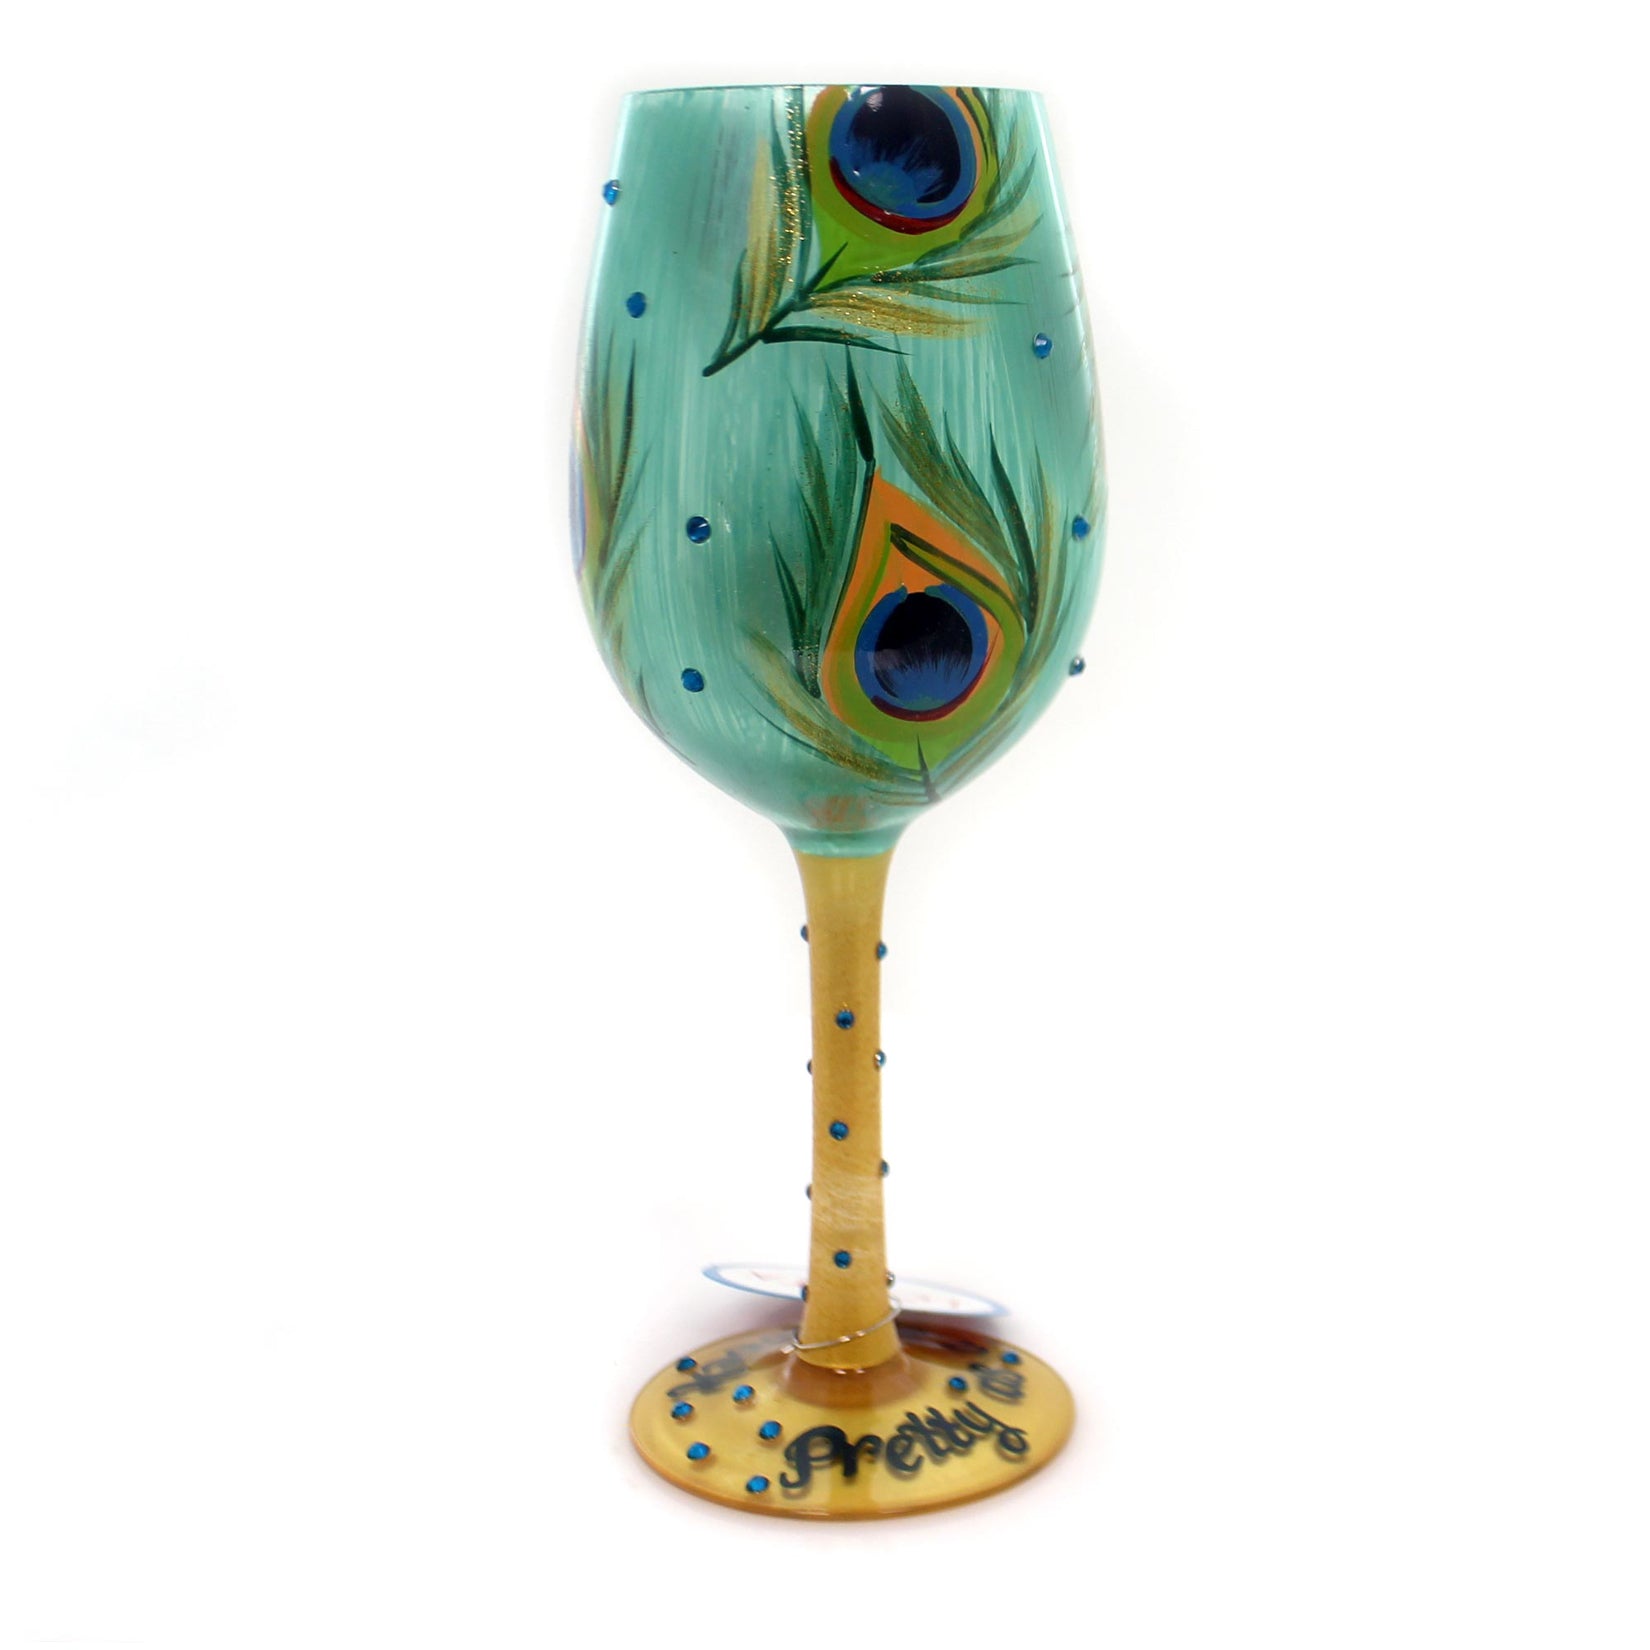 Lolita Pretty As A Peacock Hand Painted Wine Glass 15 oz